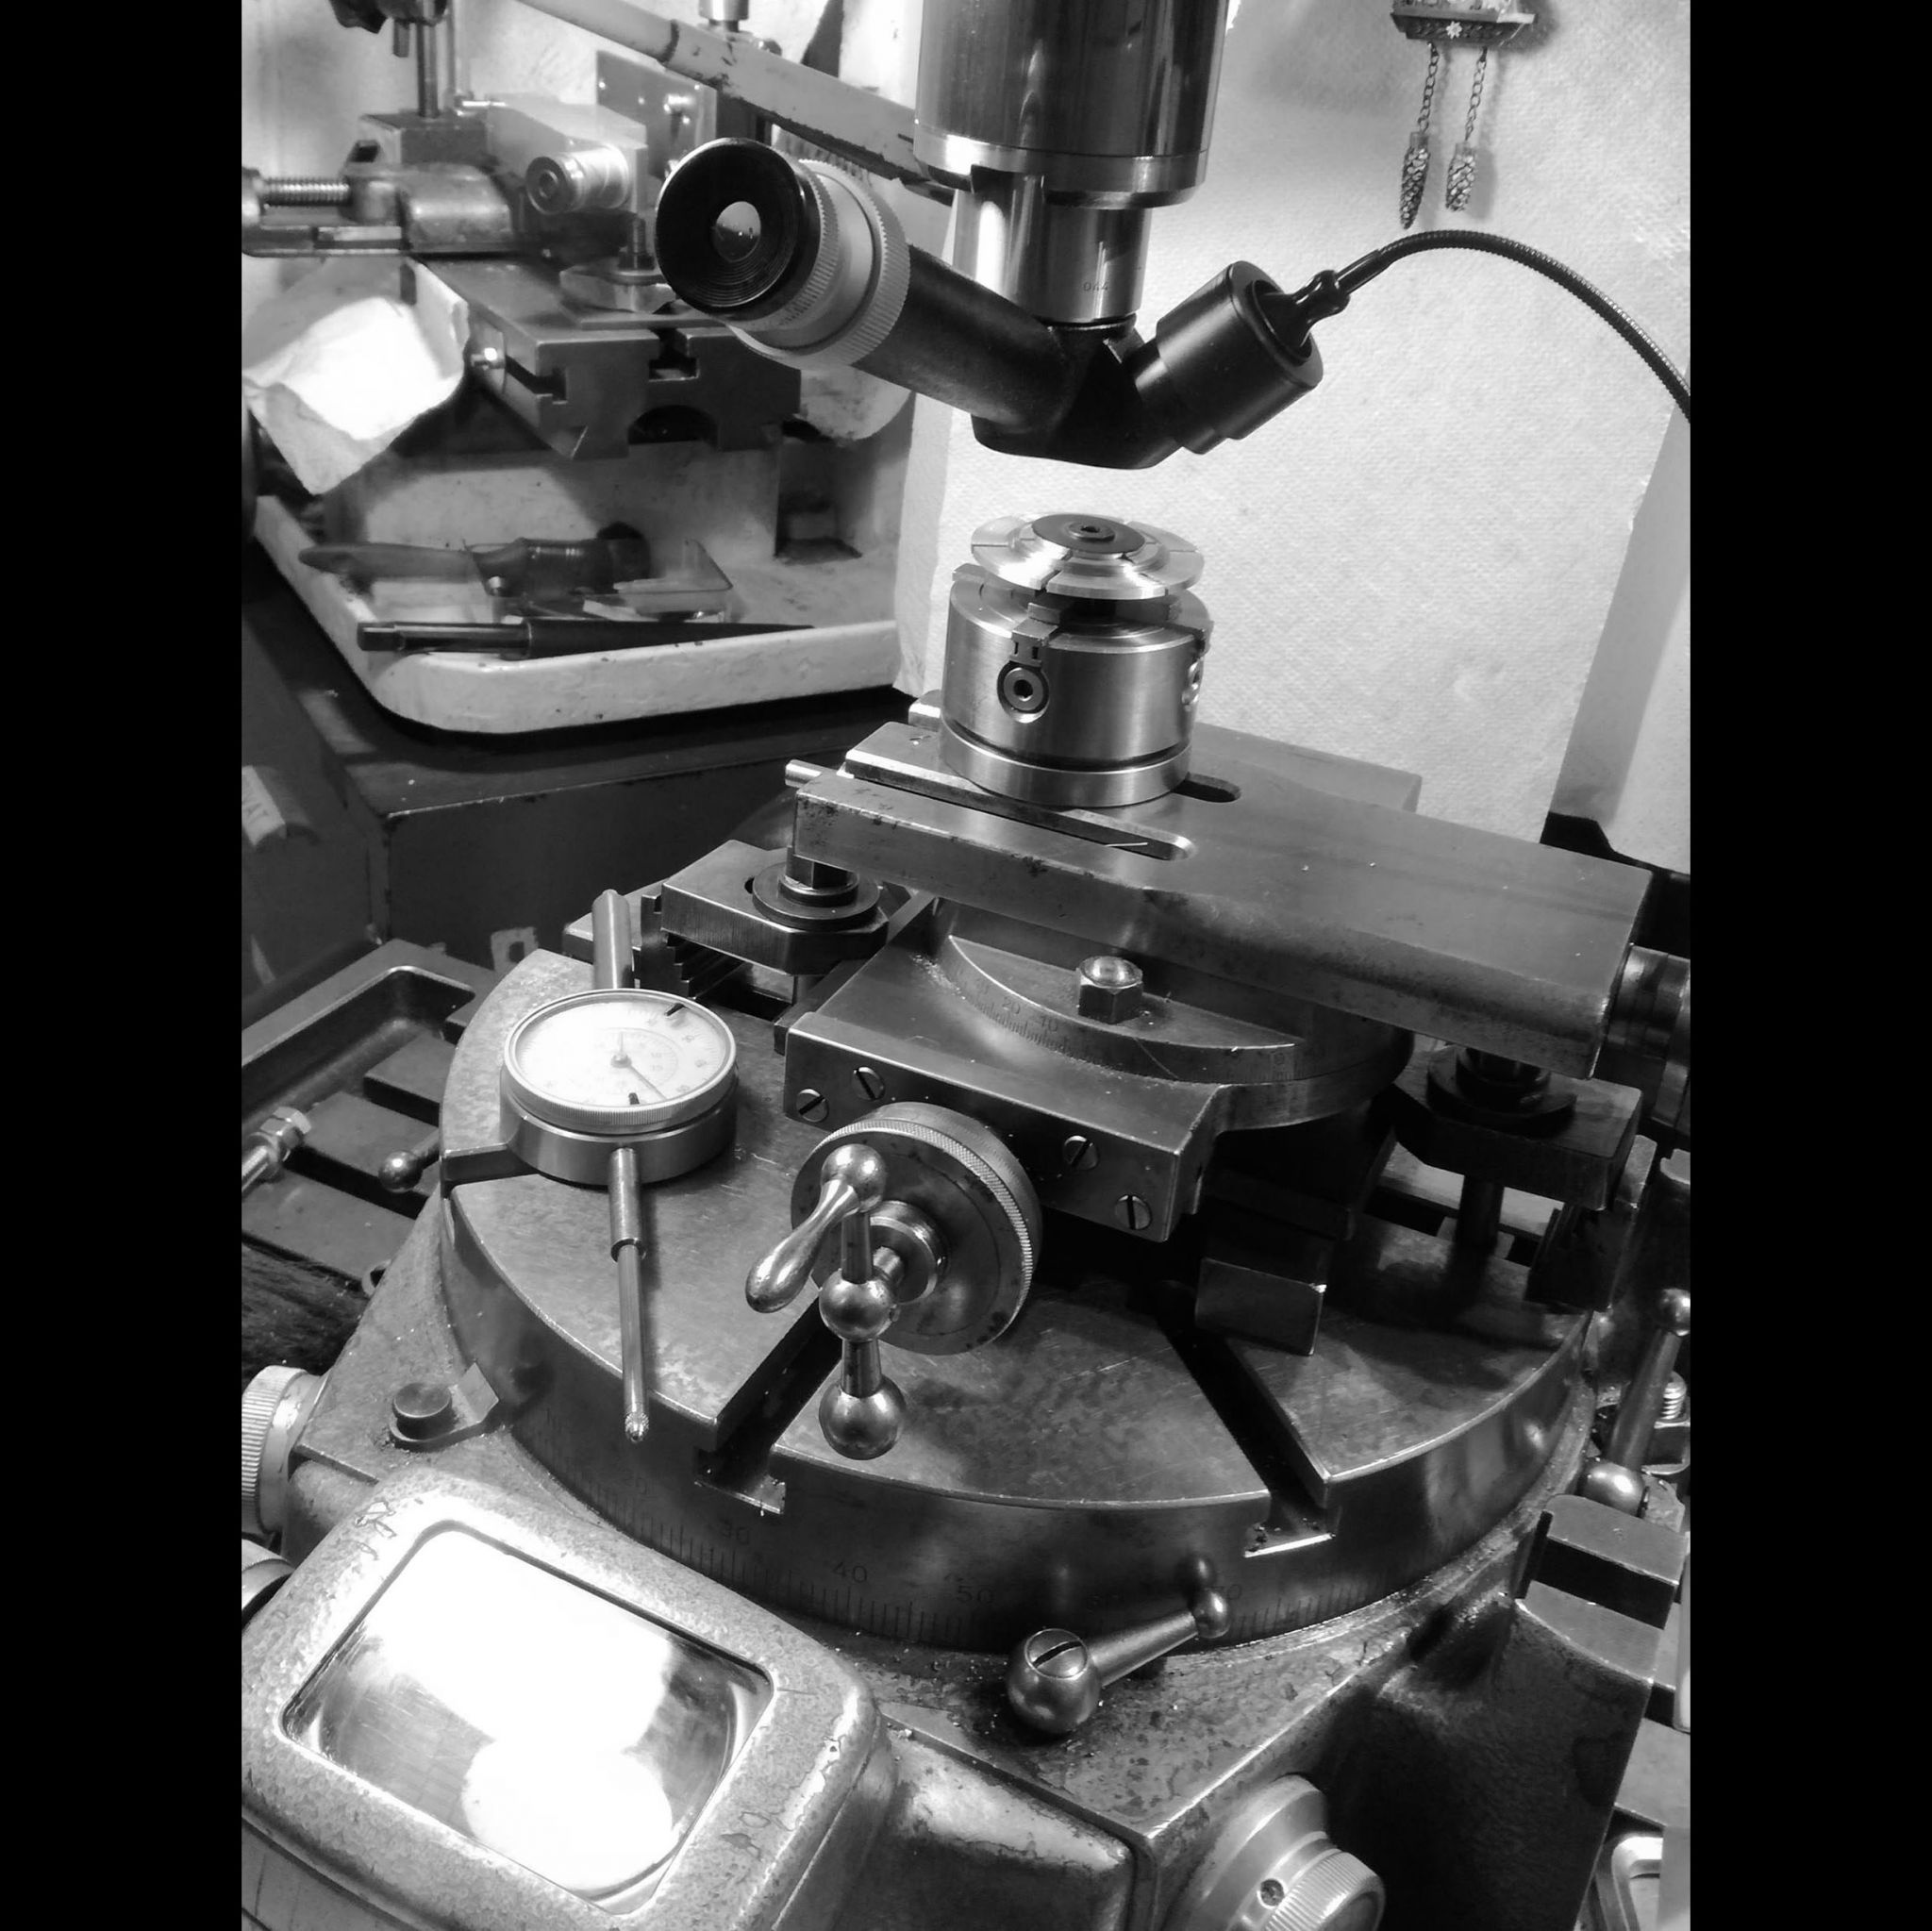 I then move the X a-xis to the center of the dial's 'track' and check the proper concentricty of rotation when the centering microscope.